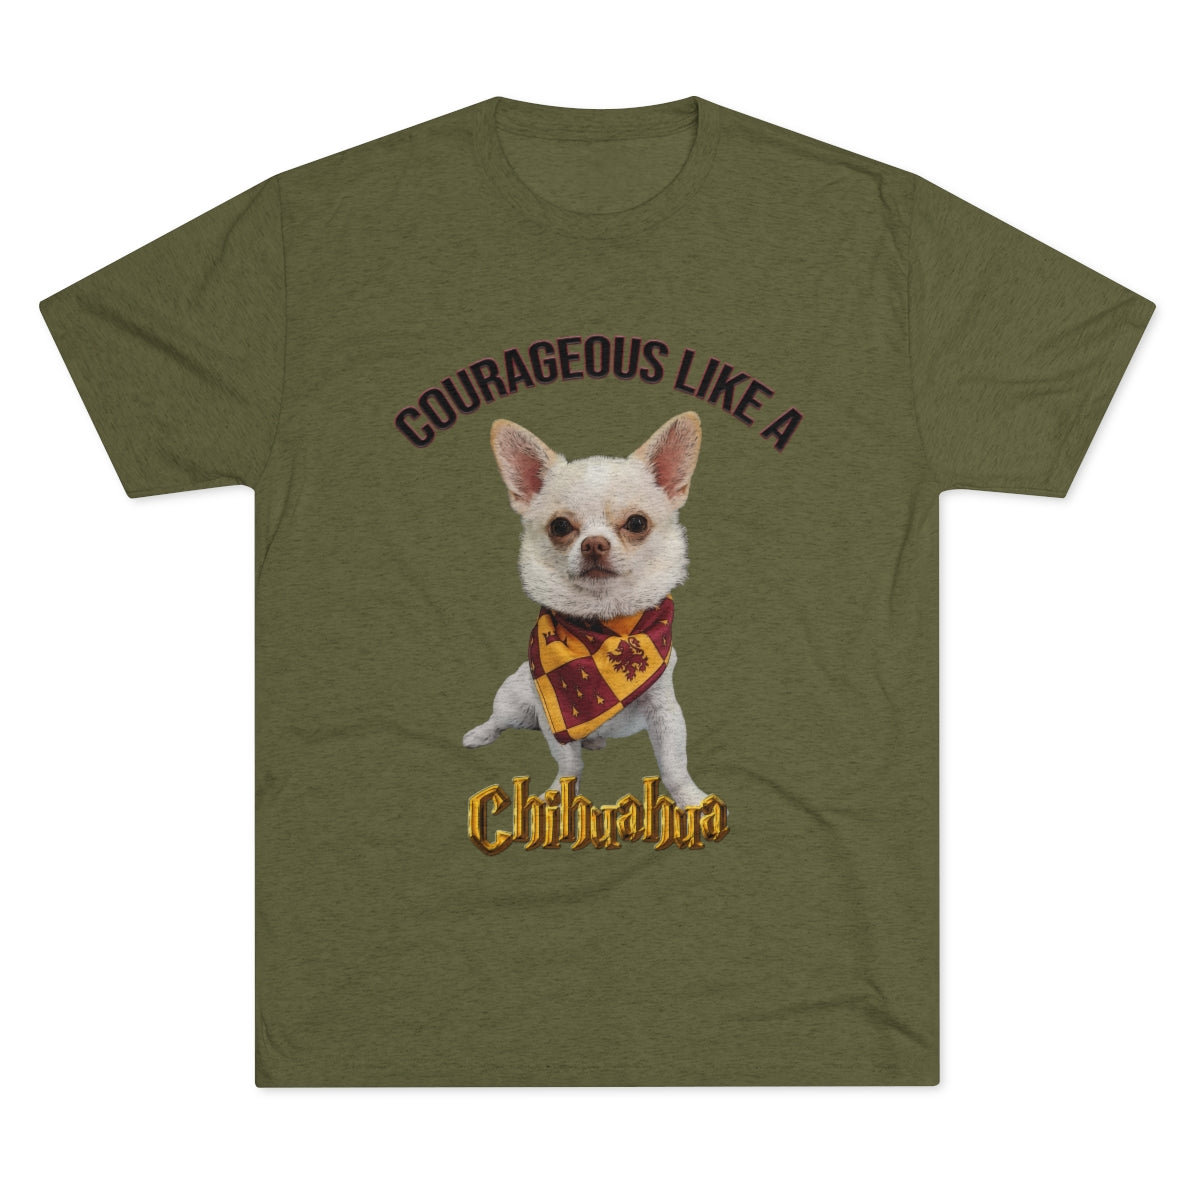 Courageous like a Chihuahua- Gryffindor Harry Potter themed- MenBrainStorm Tees